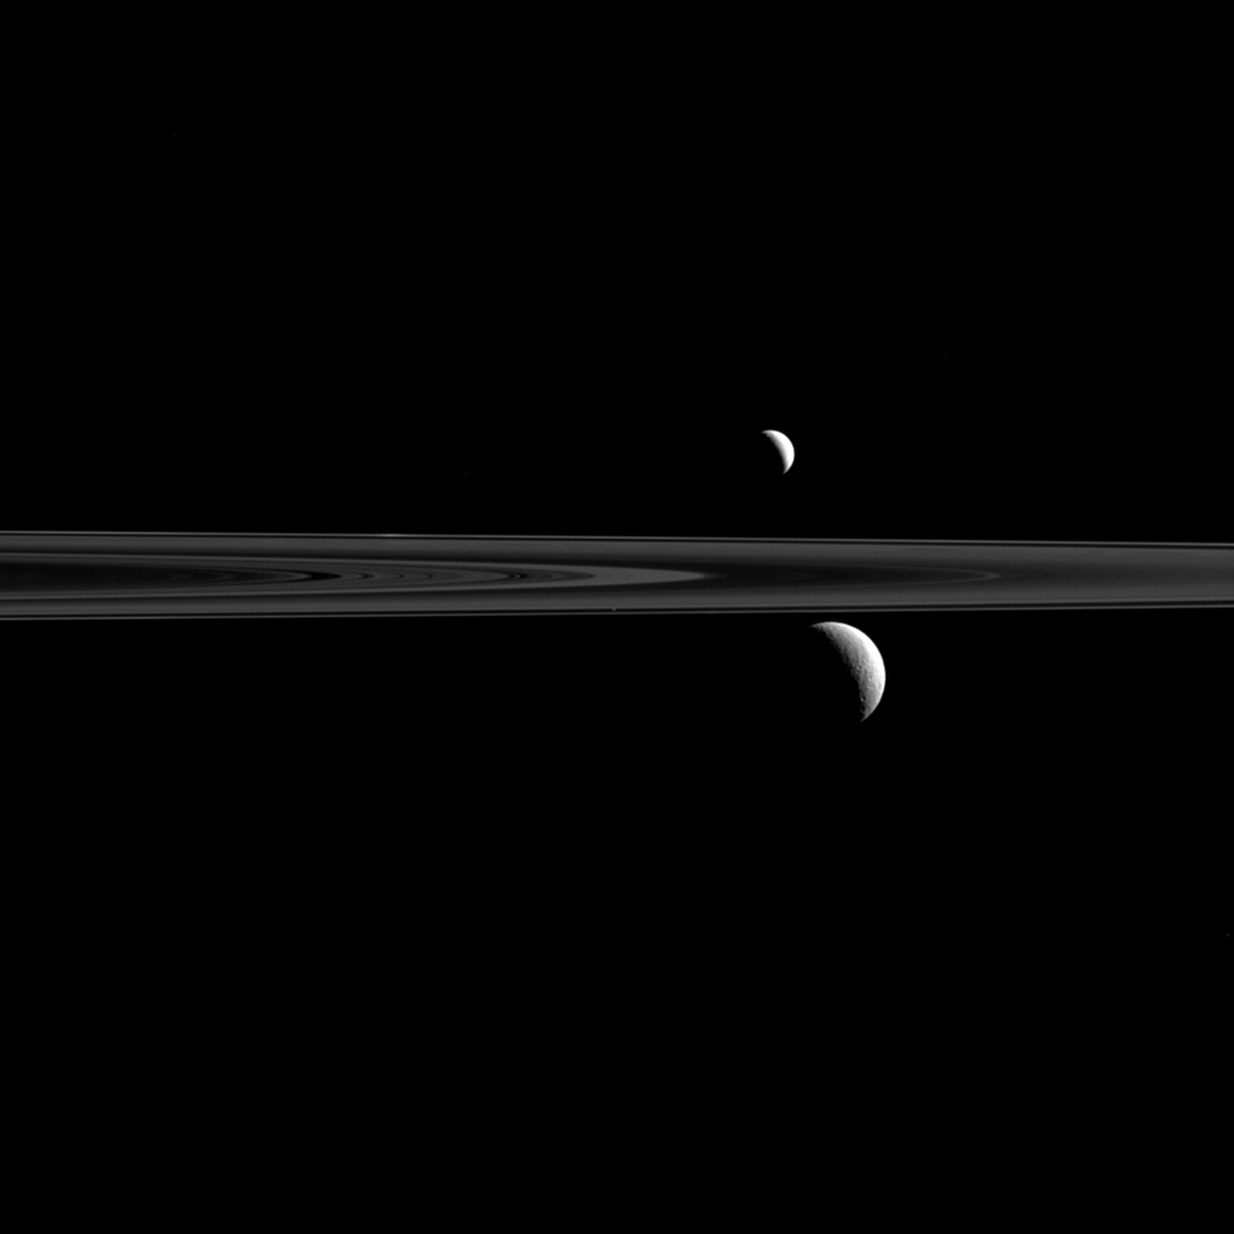 The Cassini spacecraft captures Enceladus above Saturn's rings and Rhea below. The tiny speck of Atlas can also be seen just above and to the left of Rhea, and just above the thin line of Saturn's F ring. The image was taken in visible light with the Cassini spacecraft narrow-angle camera on Sept. 24, 2015.